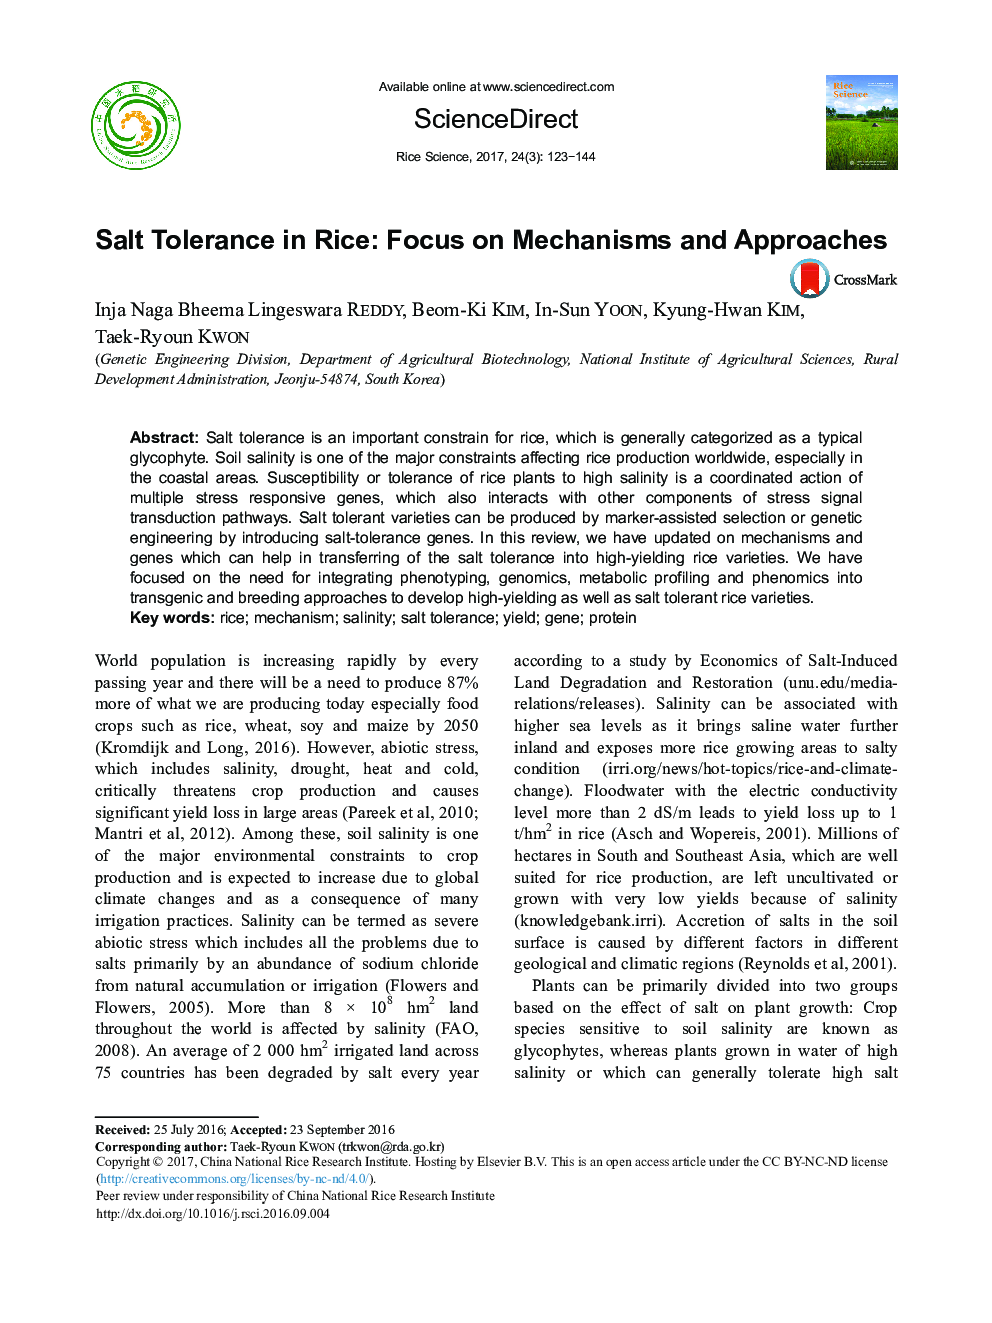 Salt Tolerance in Rice: Focus on Mechanisms and Approaches